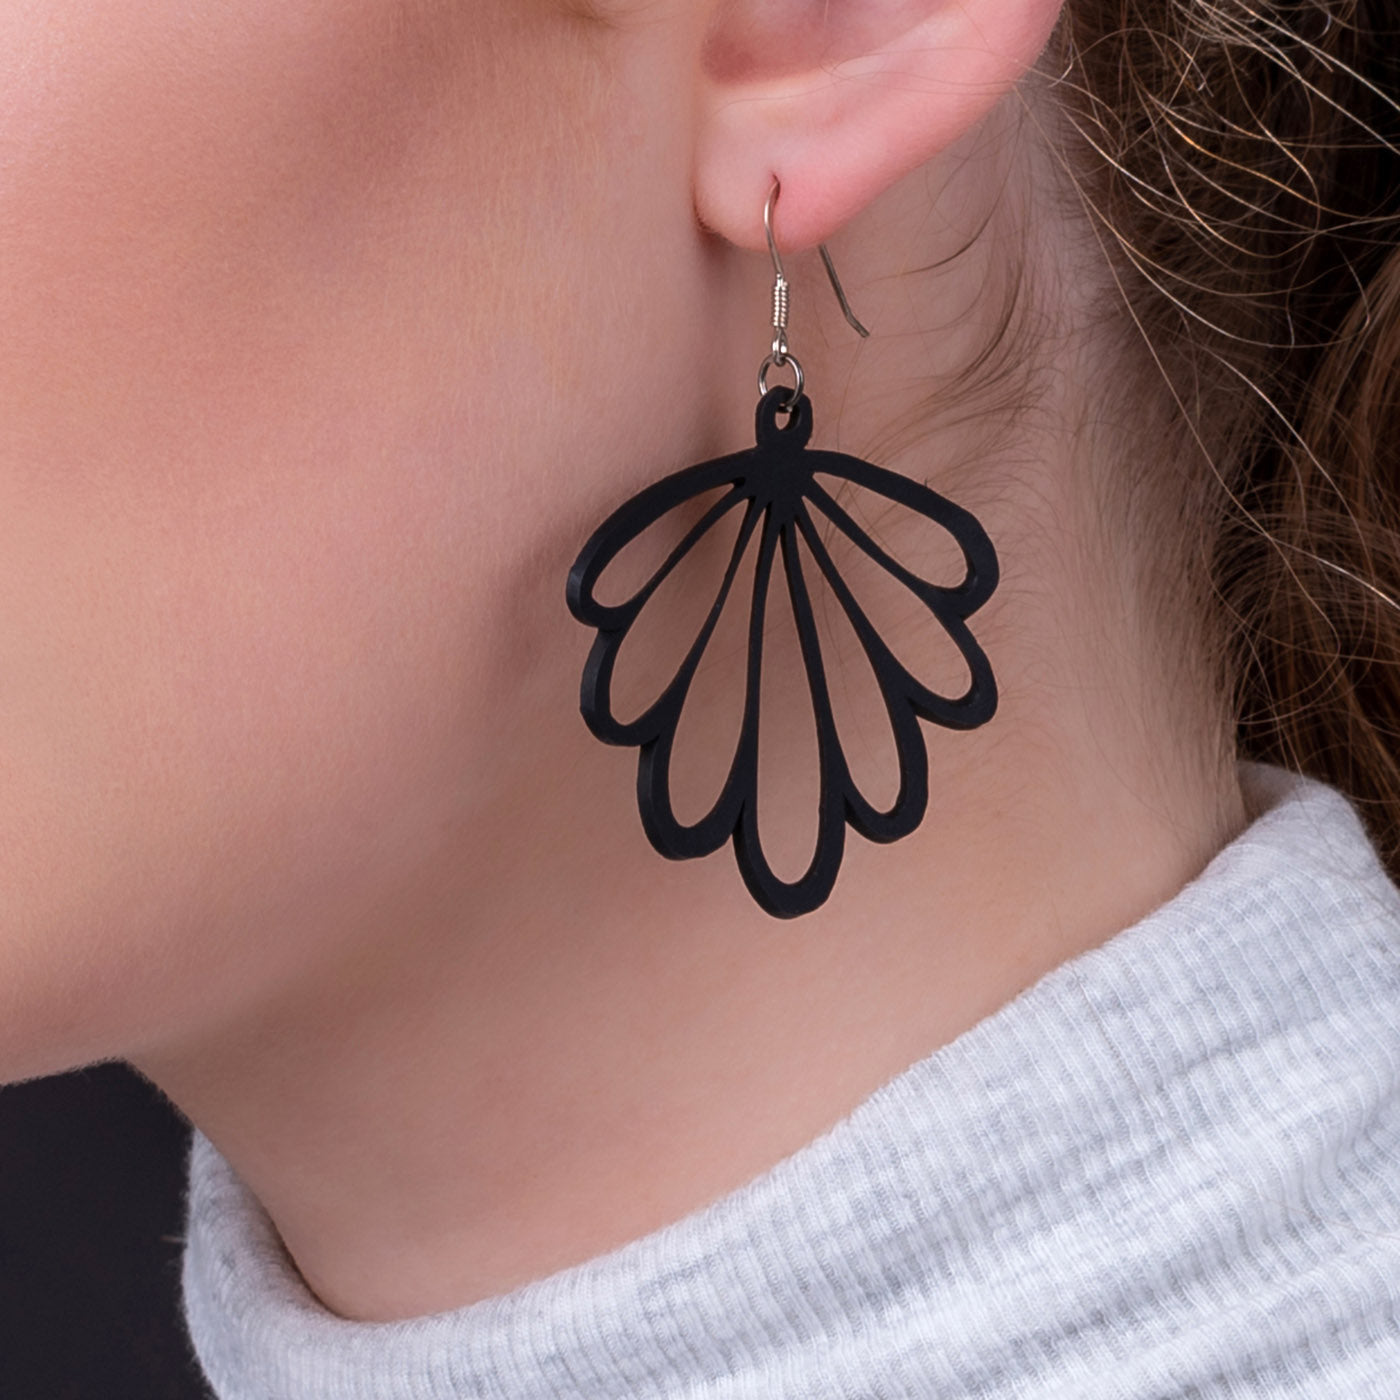 Shell Recycled Rubber Earrings by Paguro Upcycle